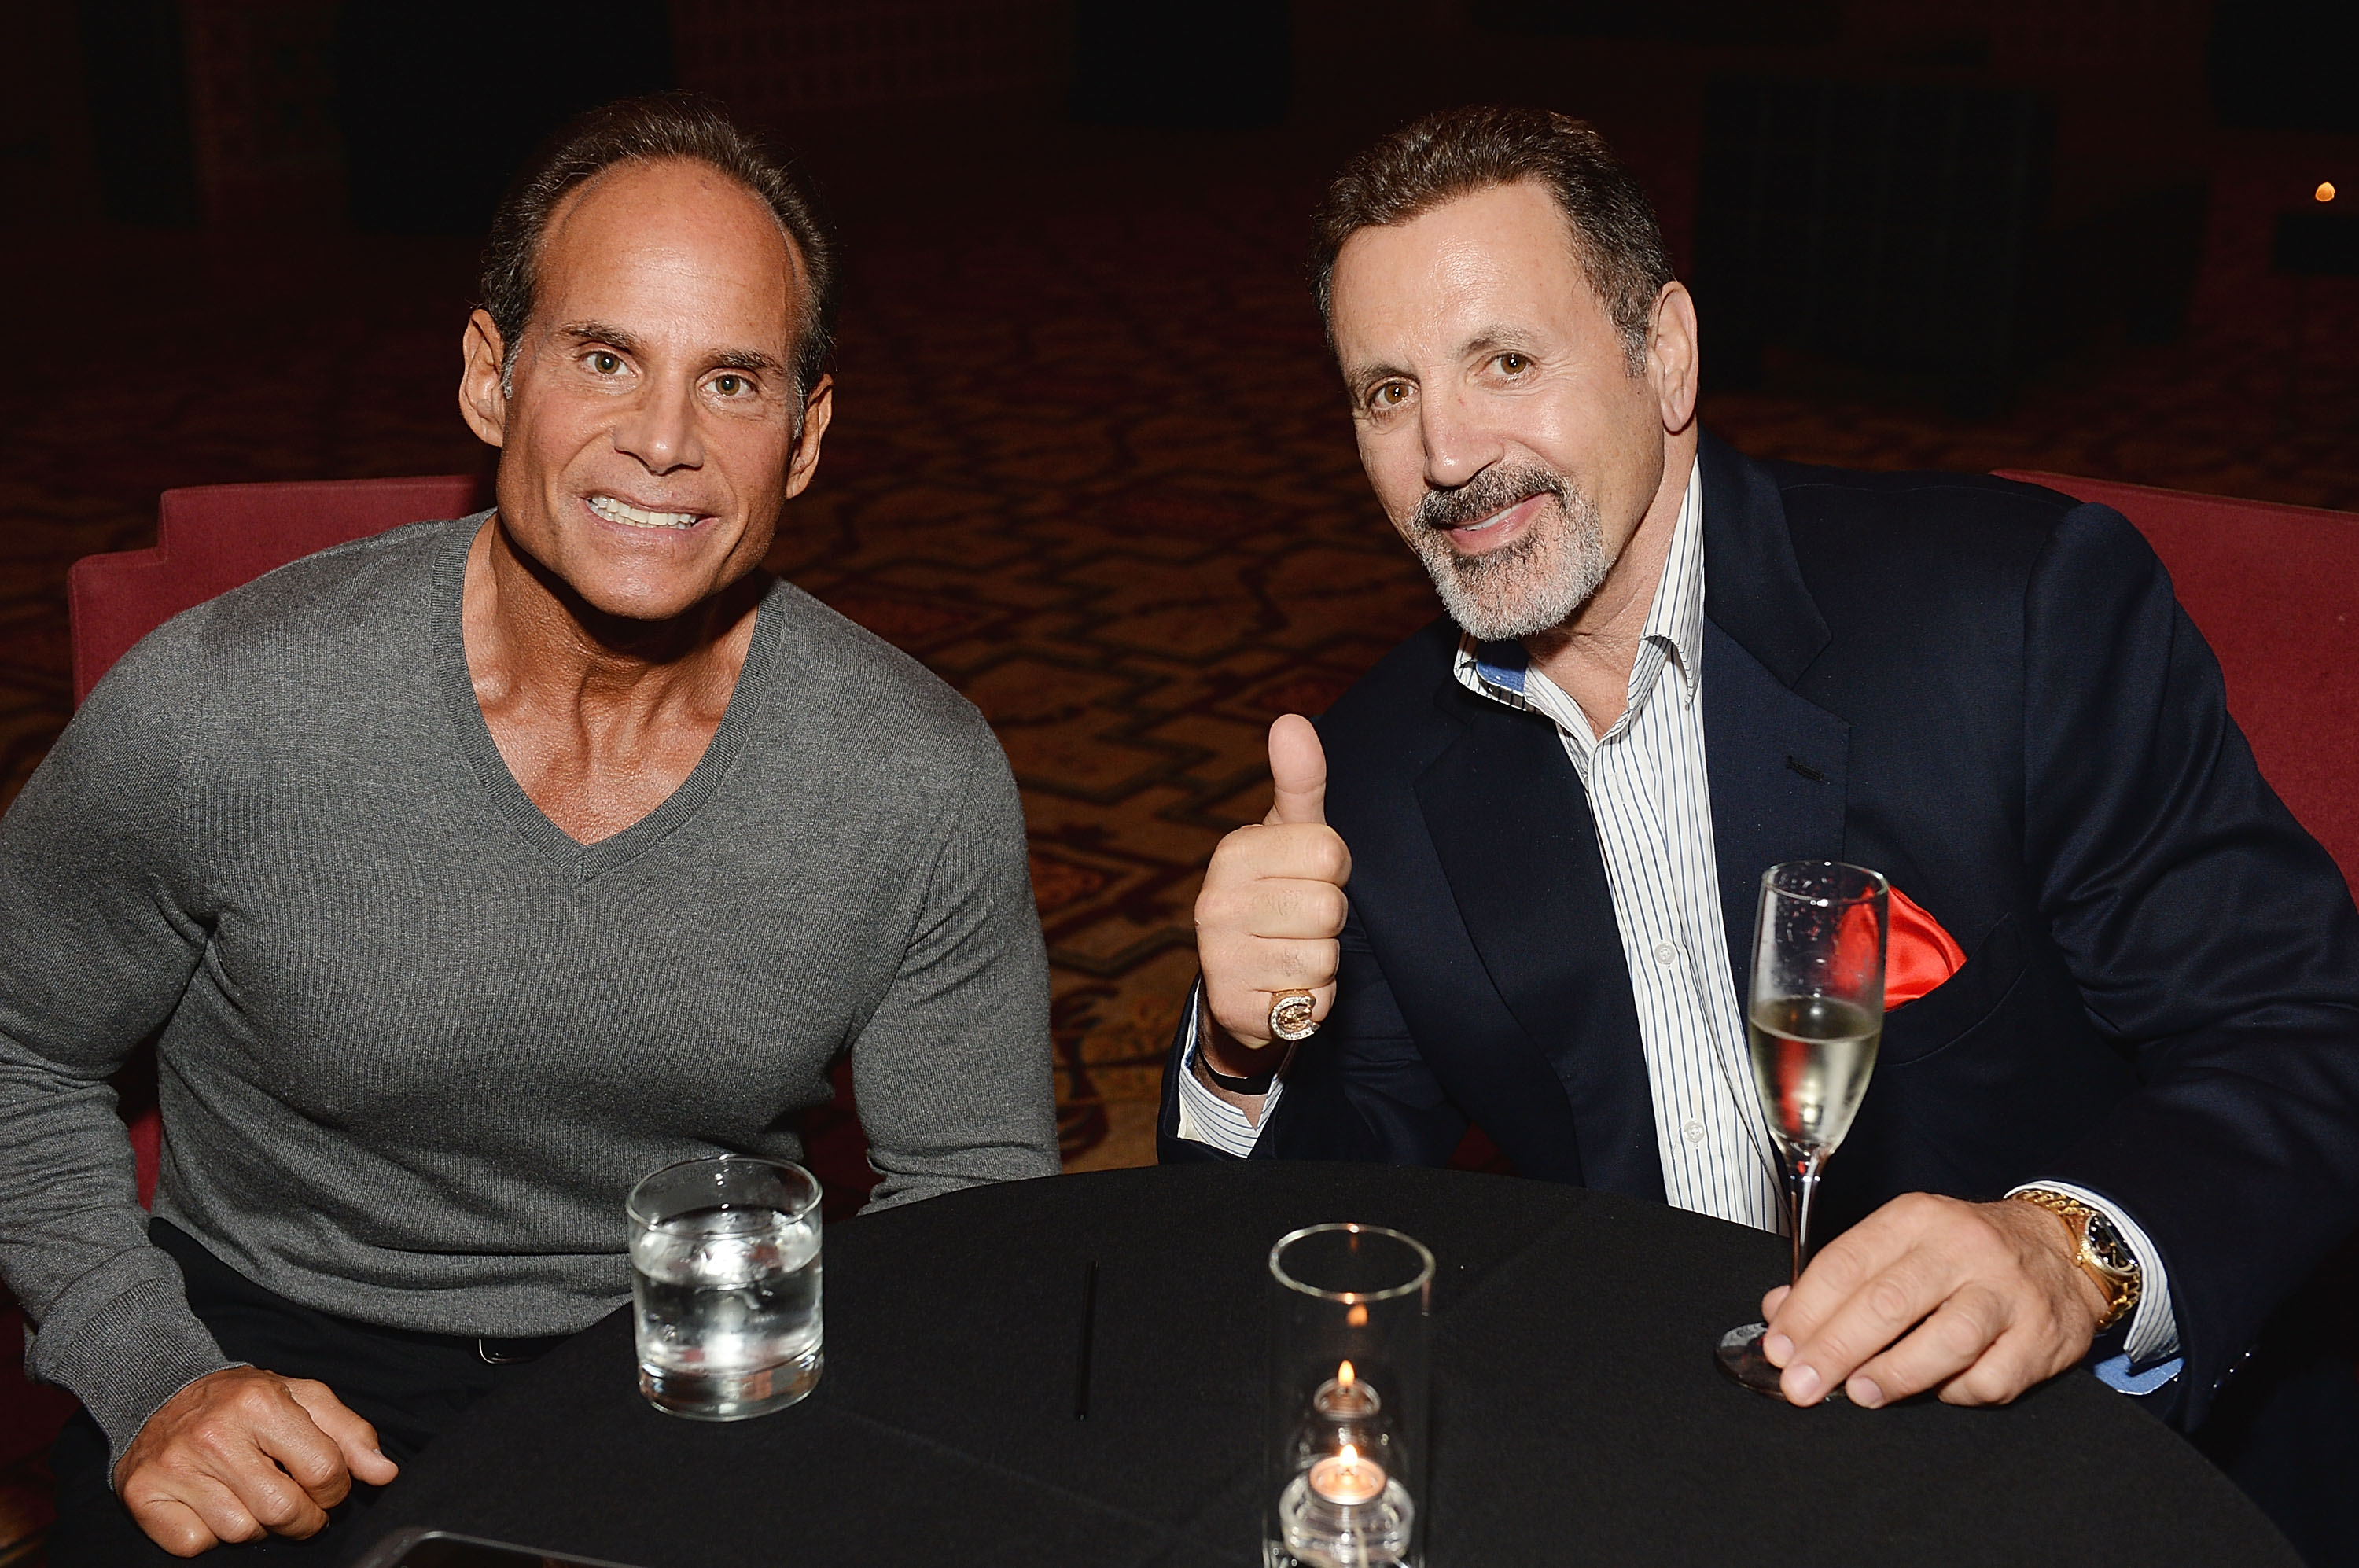 Michael Torchia & Frank Stallone - Los Angeles Premiere Of "GENERATION IRON" From The Producer Of Pumping Iron